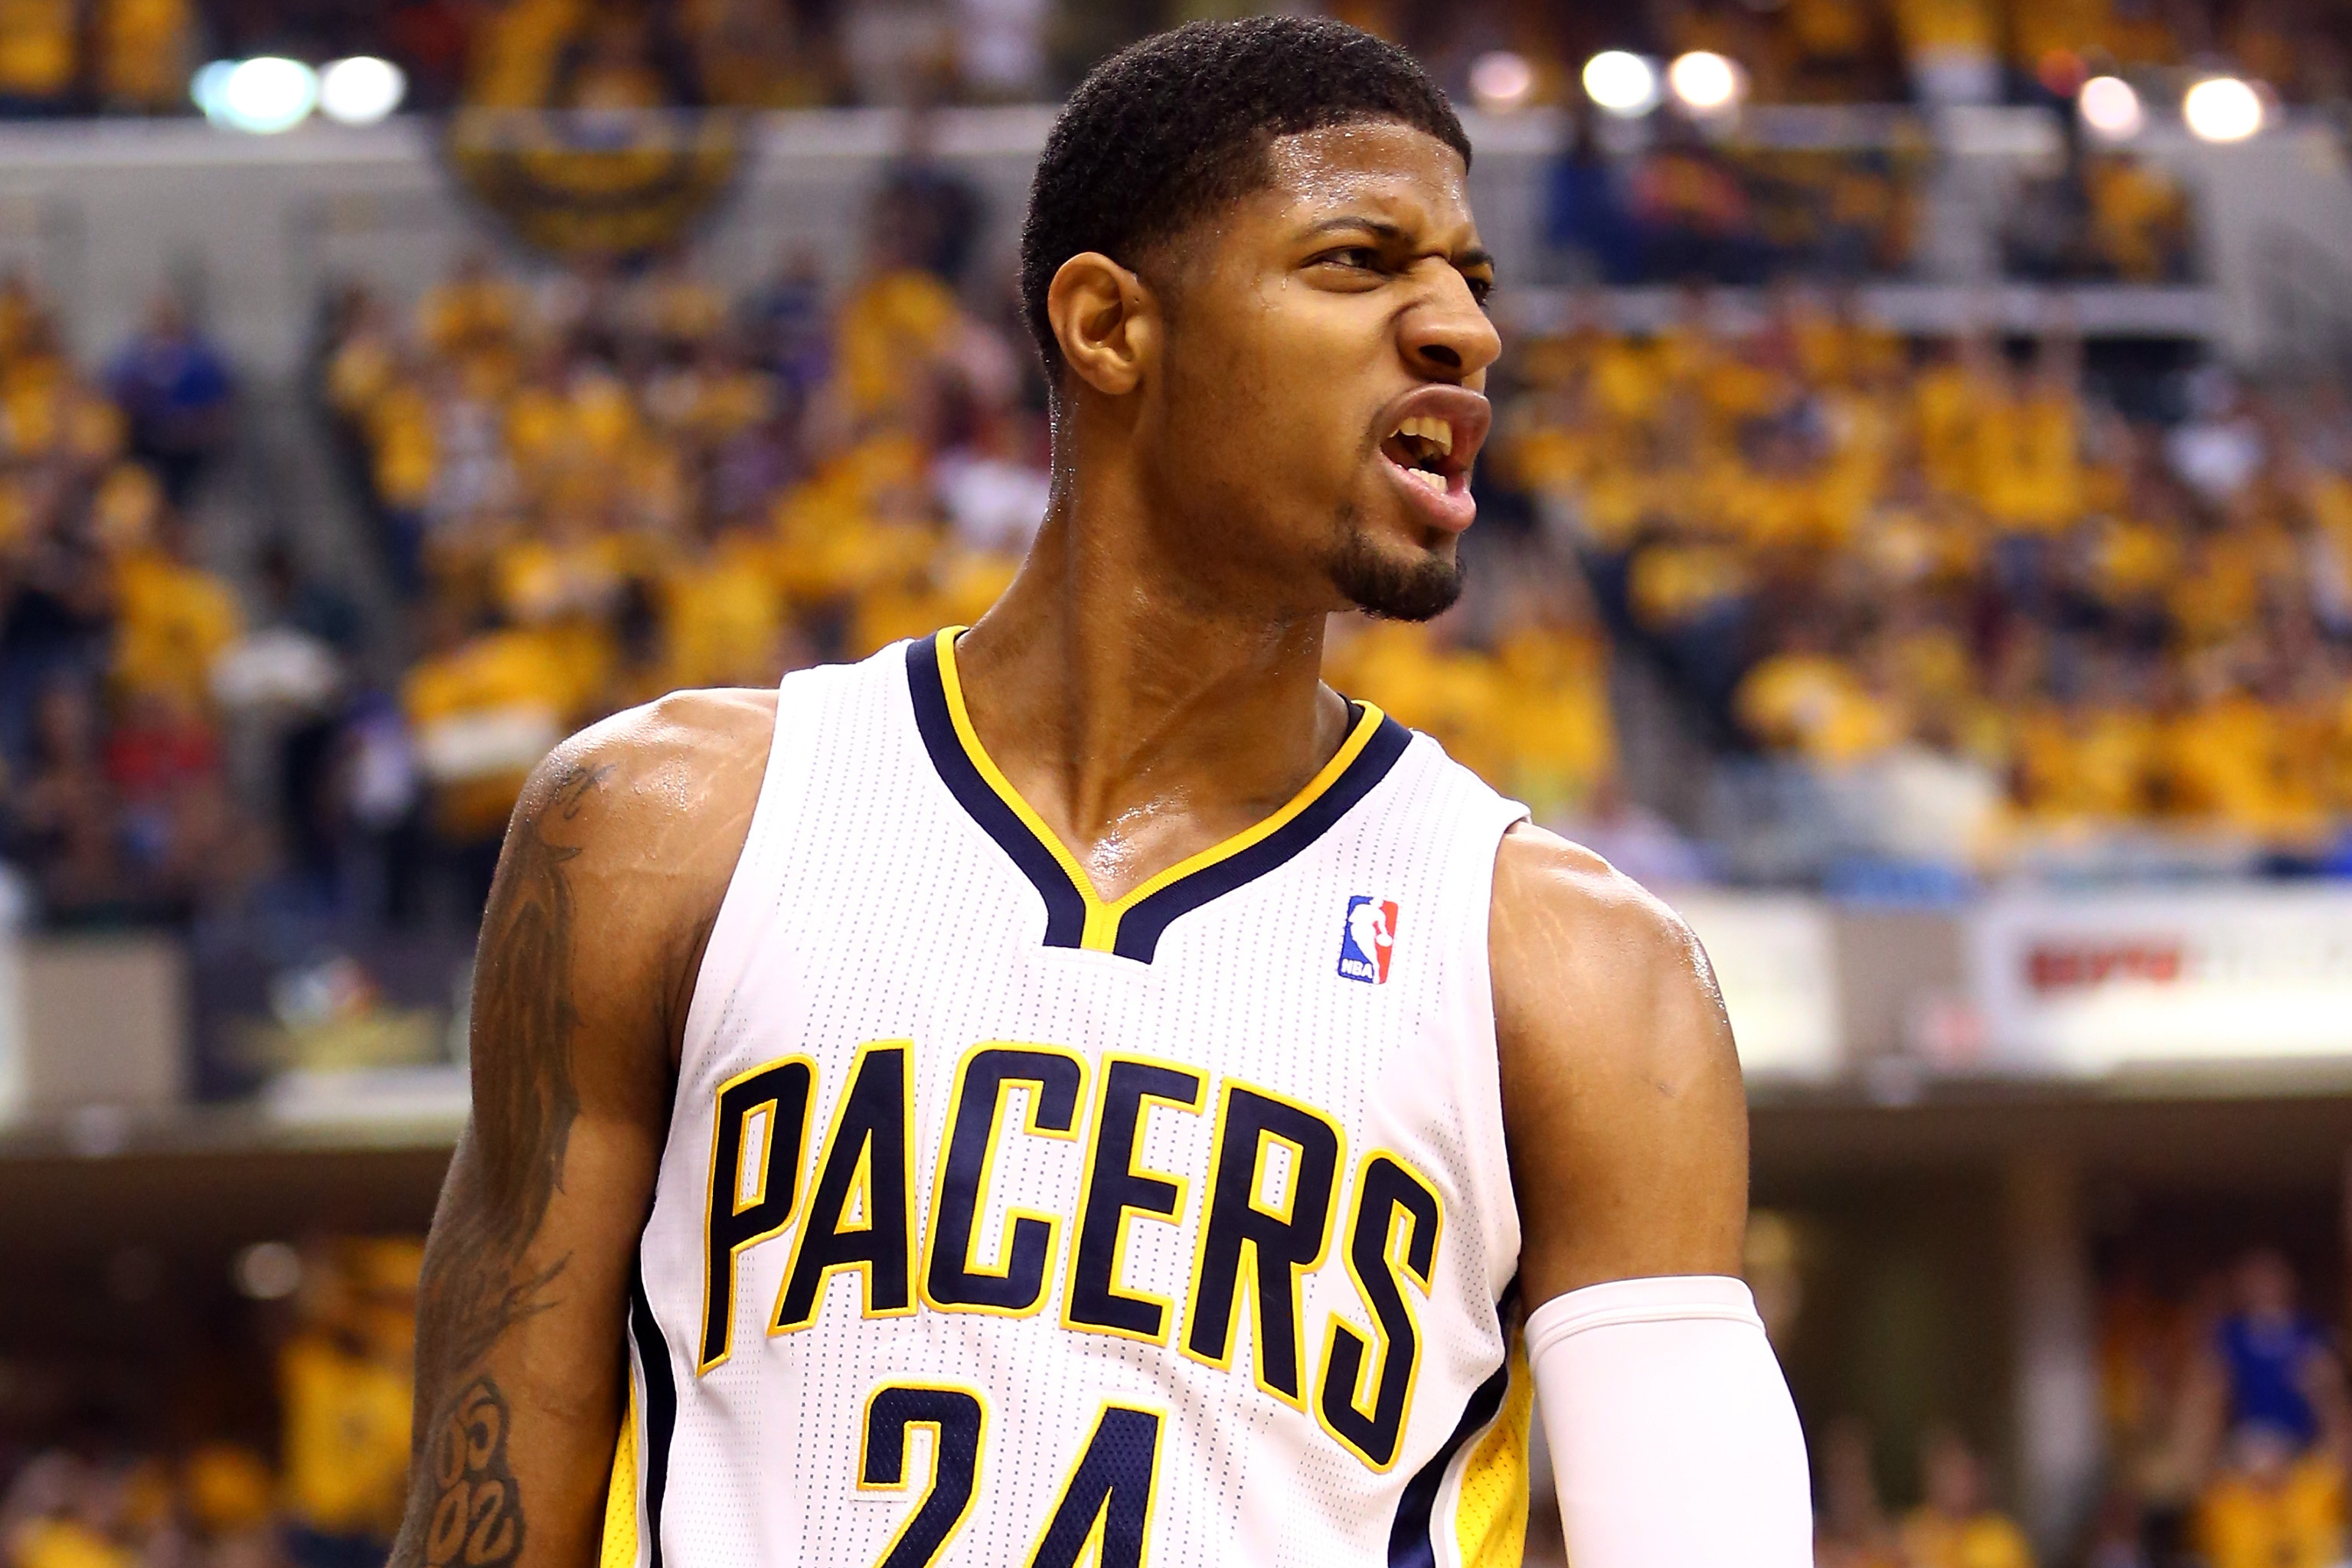 Pacers' Paul George makes winning his priority, even over coming home –  Daily News